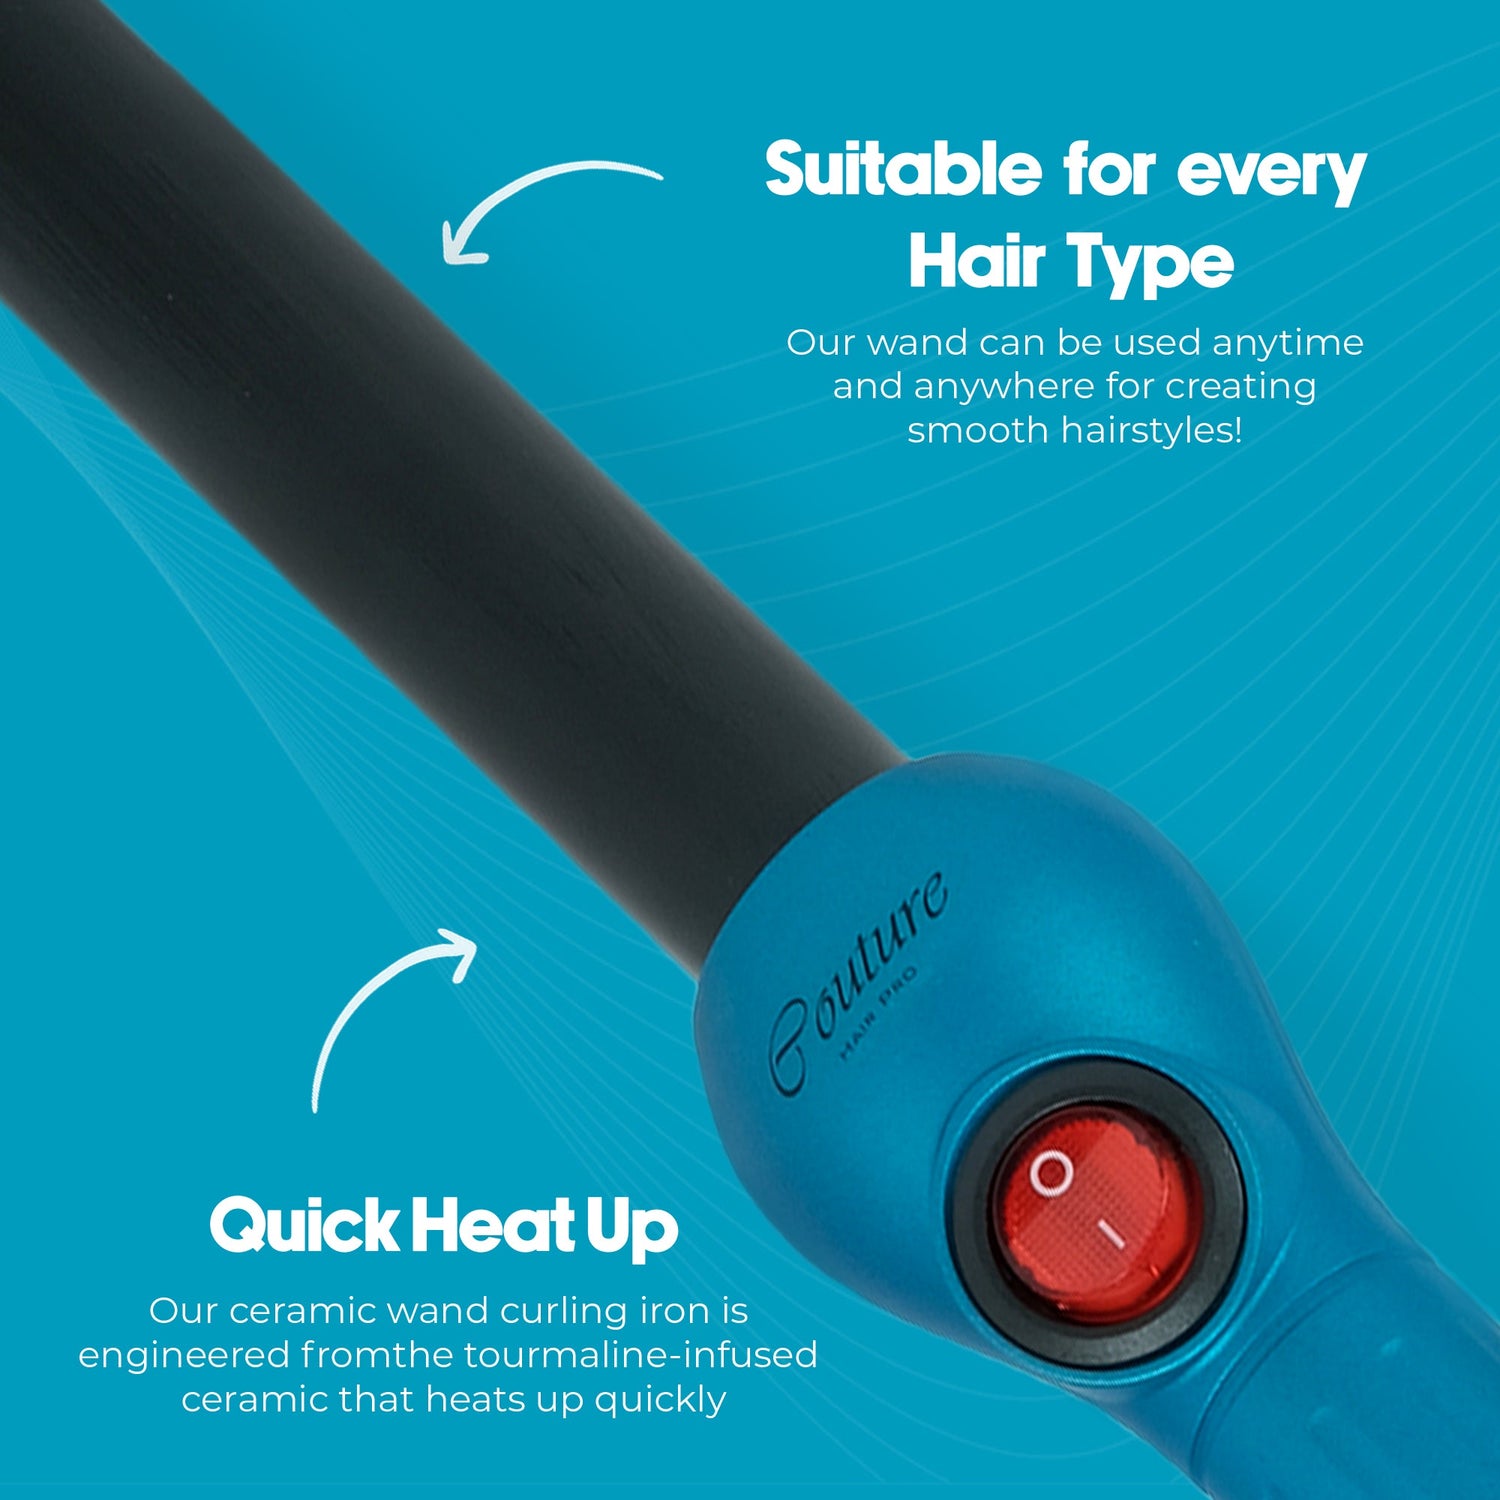 Couture Hair Pro Hair Straightener 1.25'' Beverly Hills Limited Edition - Crystal Blue - Couture Hair Pro